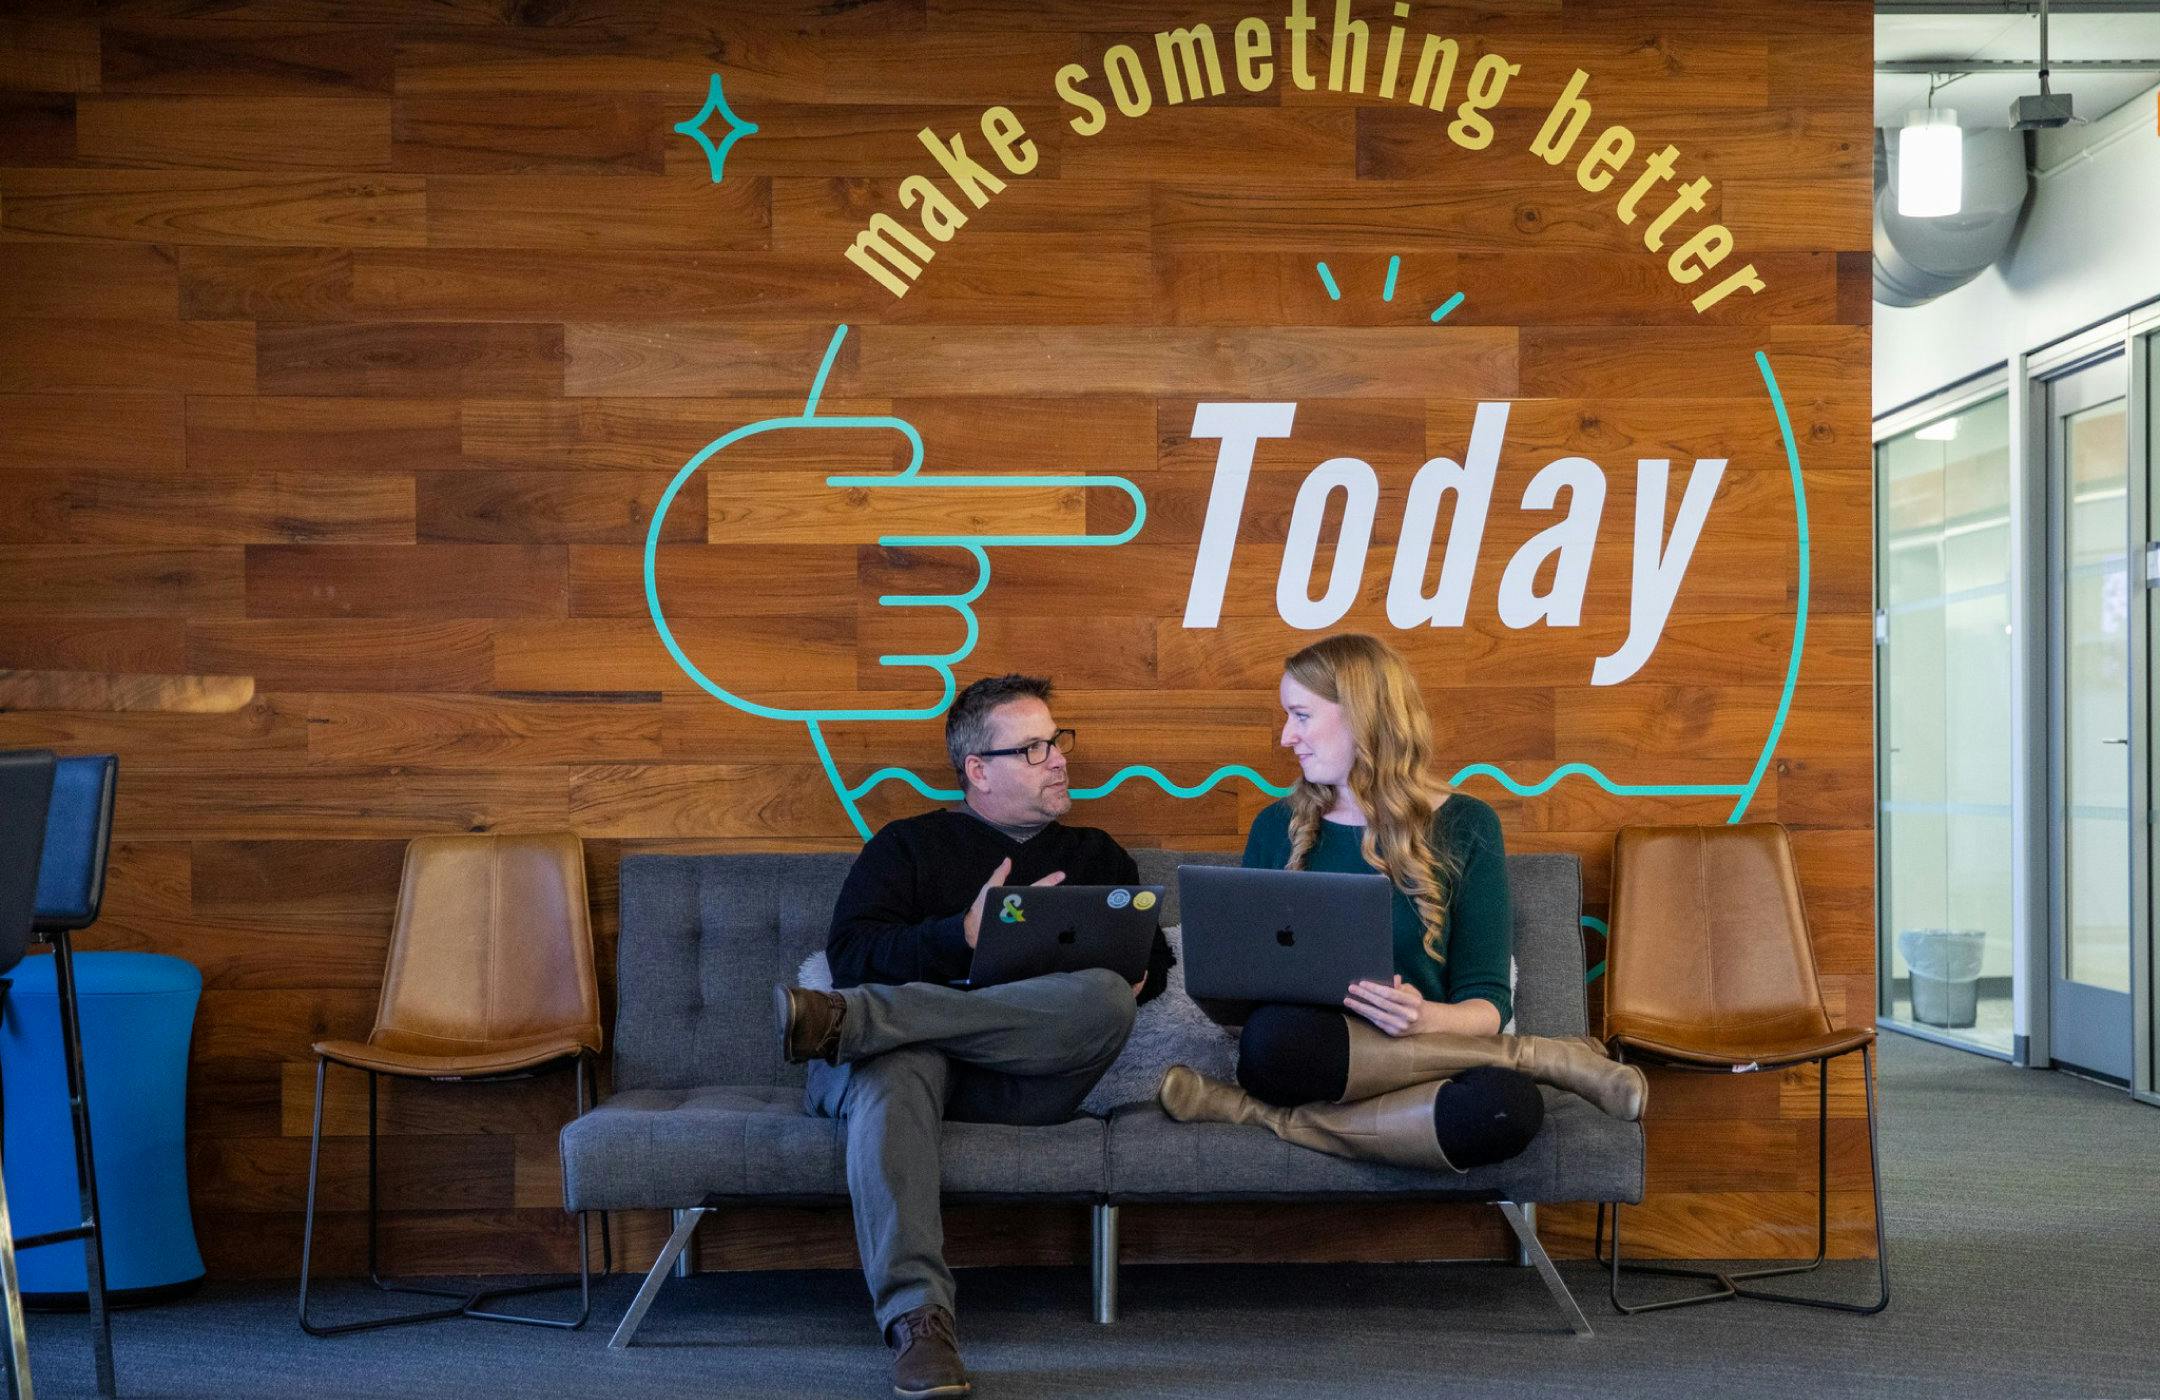 Photo of two Amperity employees collaborating under a sign that says "Make something better today"